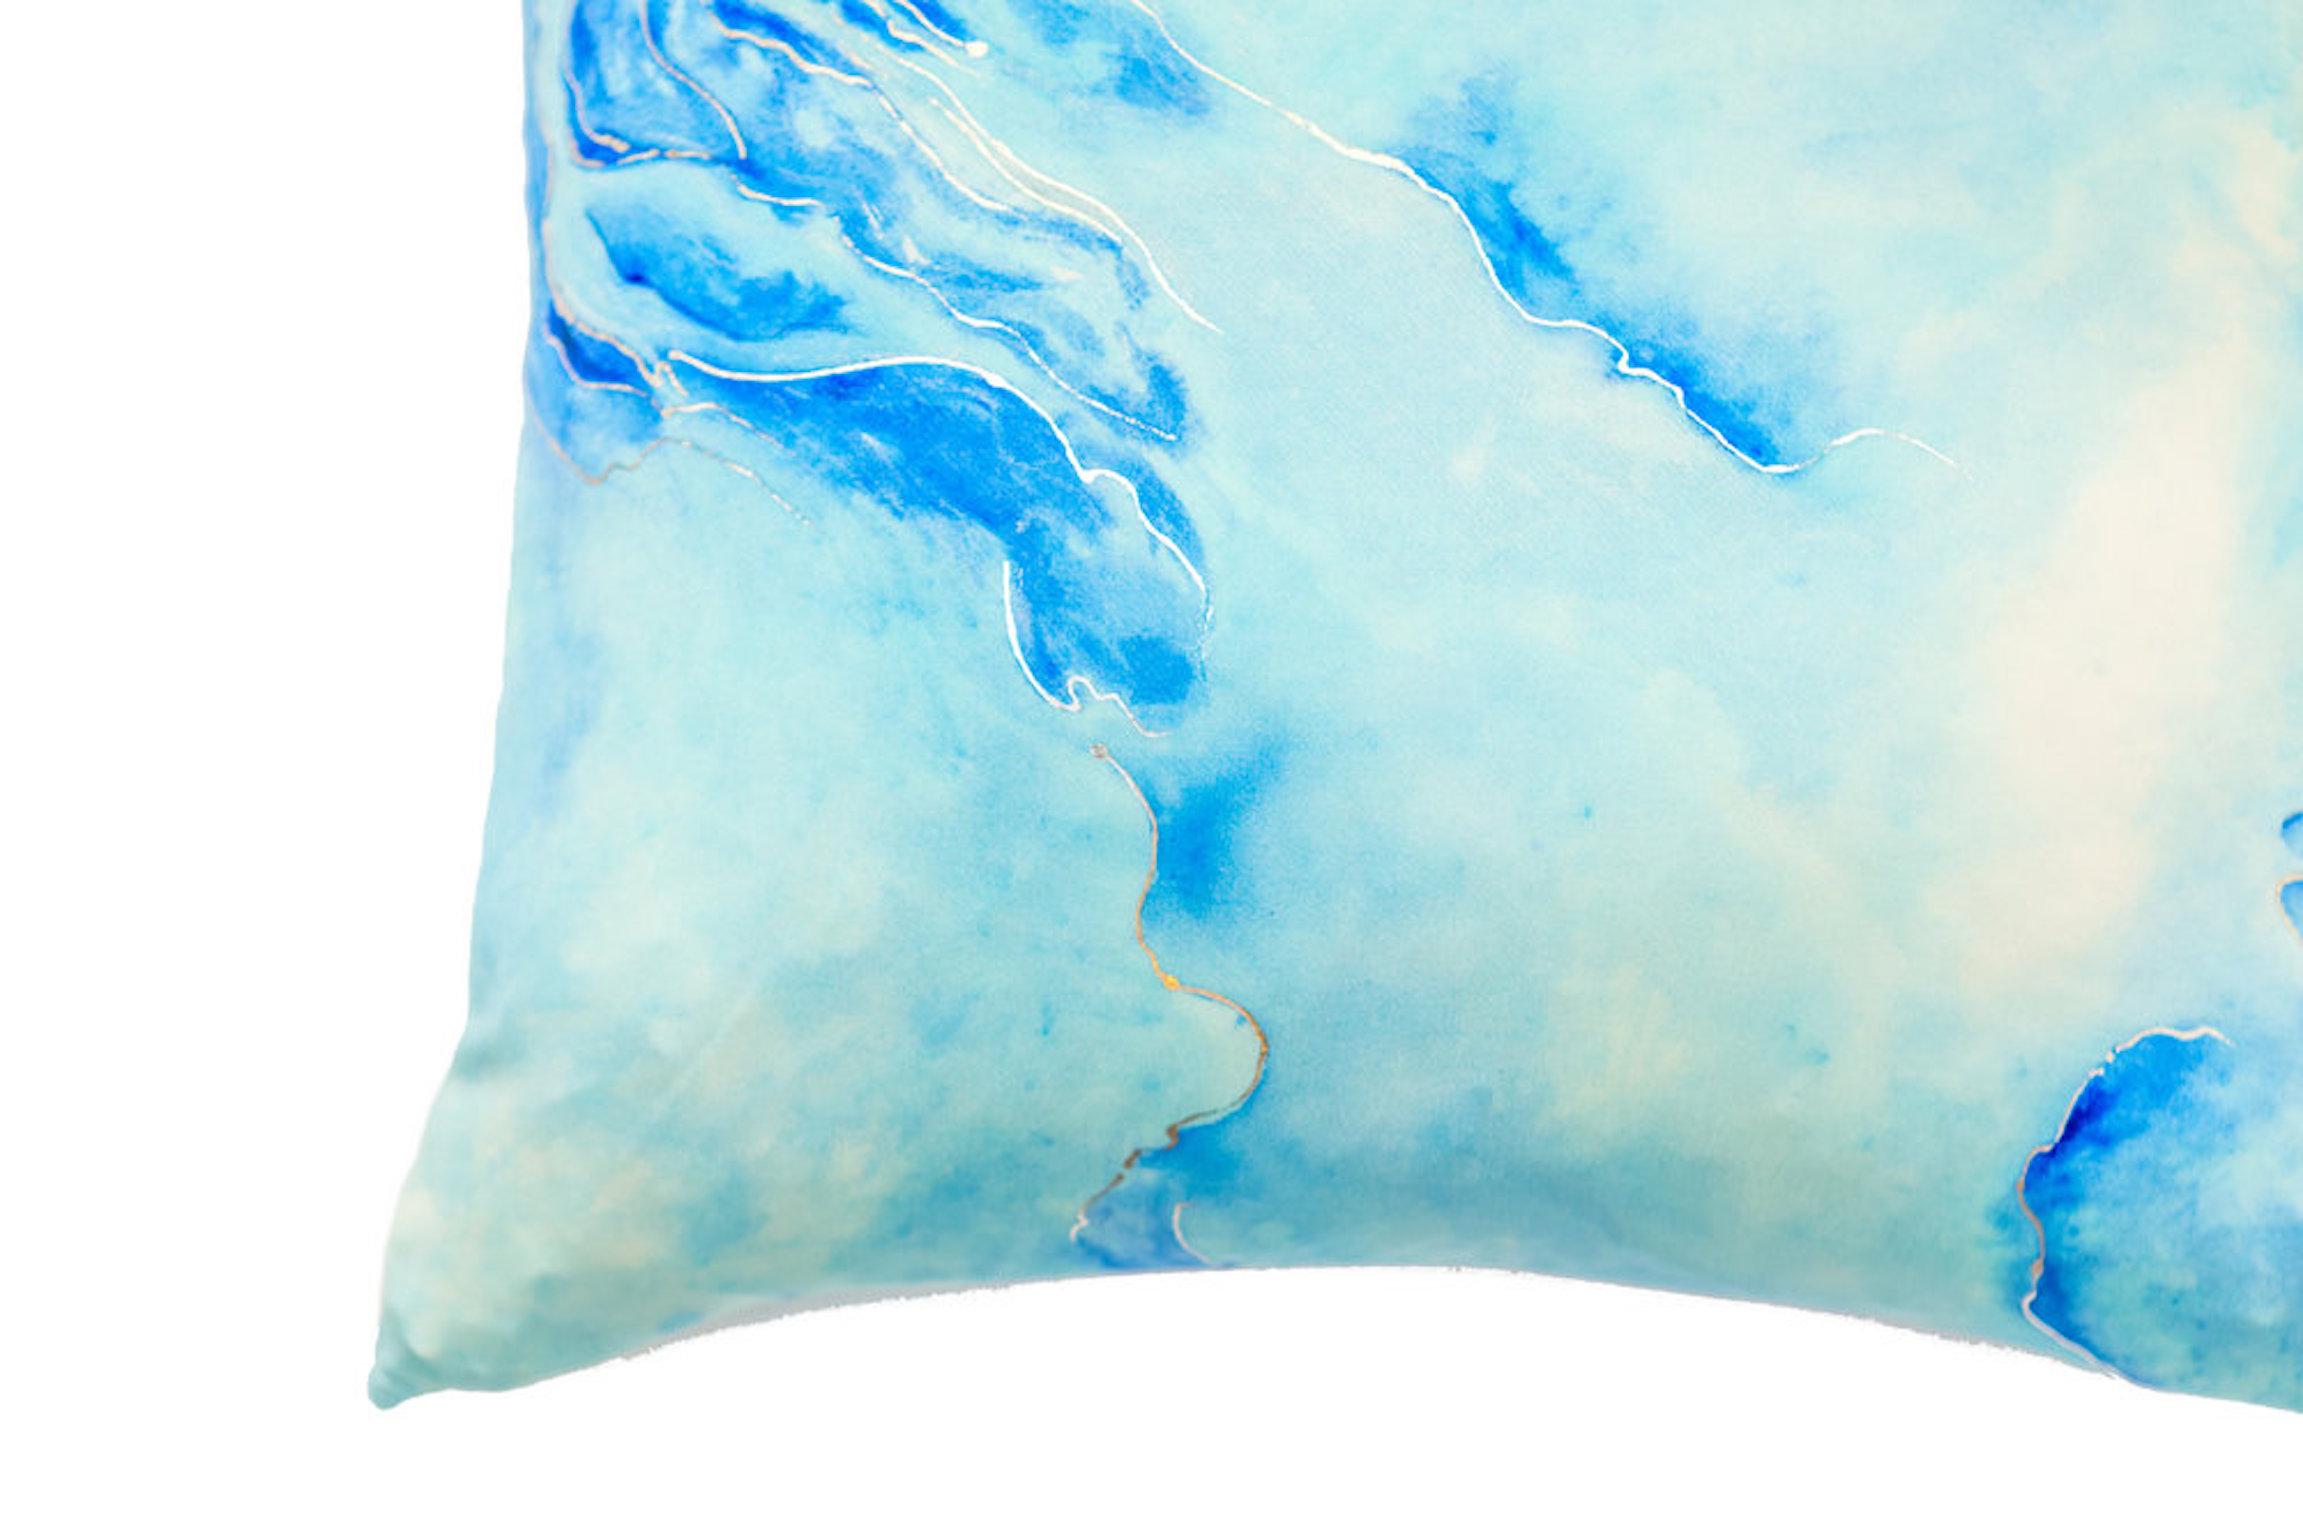 Diverse in beauty, glacier inspires hand-painted expression in desaturated hues. Rippling ice and water flows fill the space as the pillow brings to life the twinkle and beauty of ancestral snowy valleys.

Available in a variety of vibrant colors